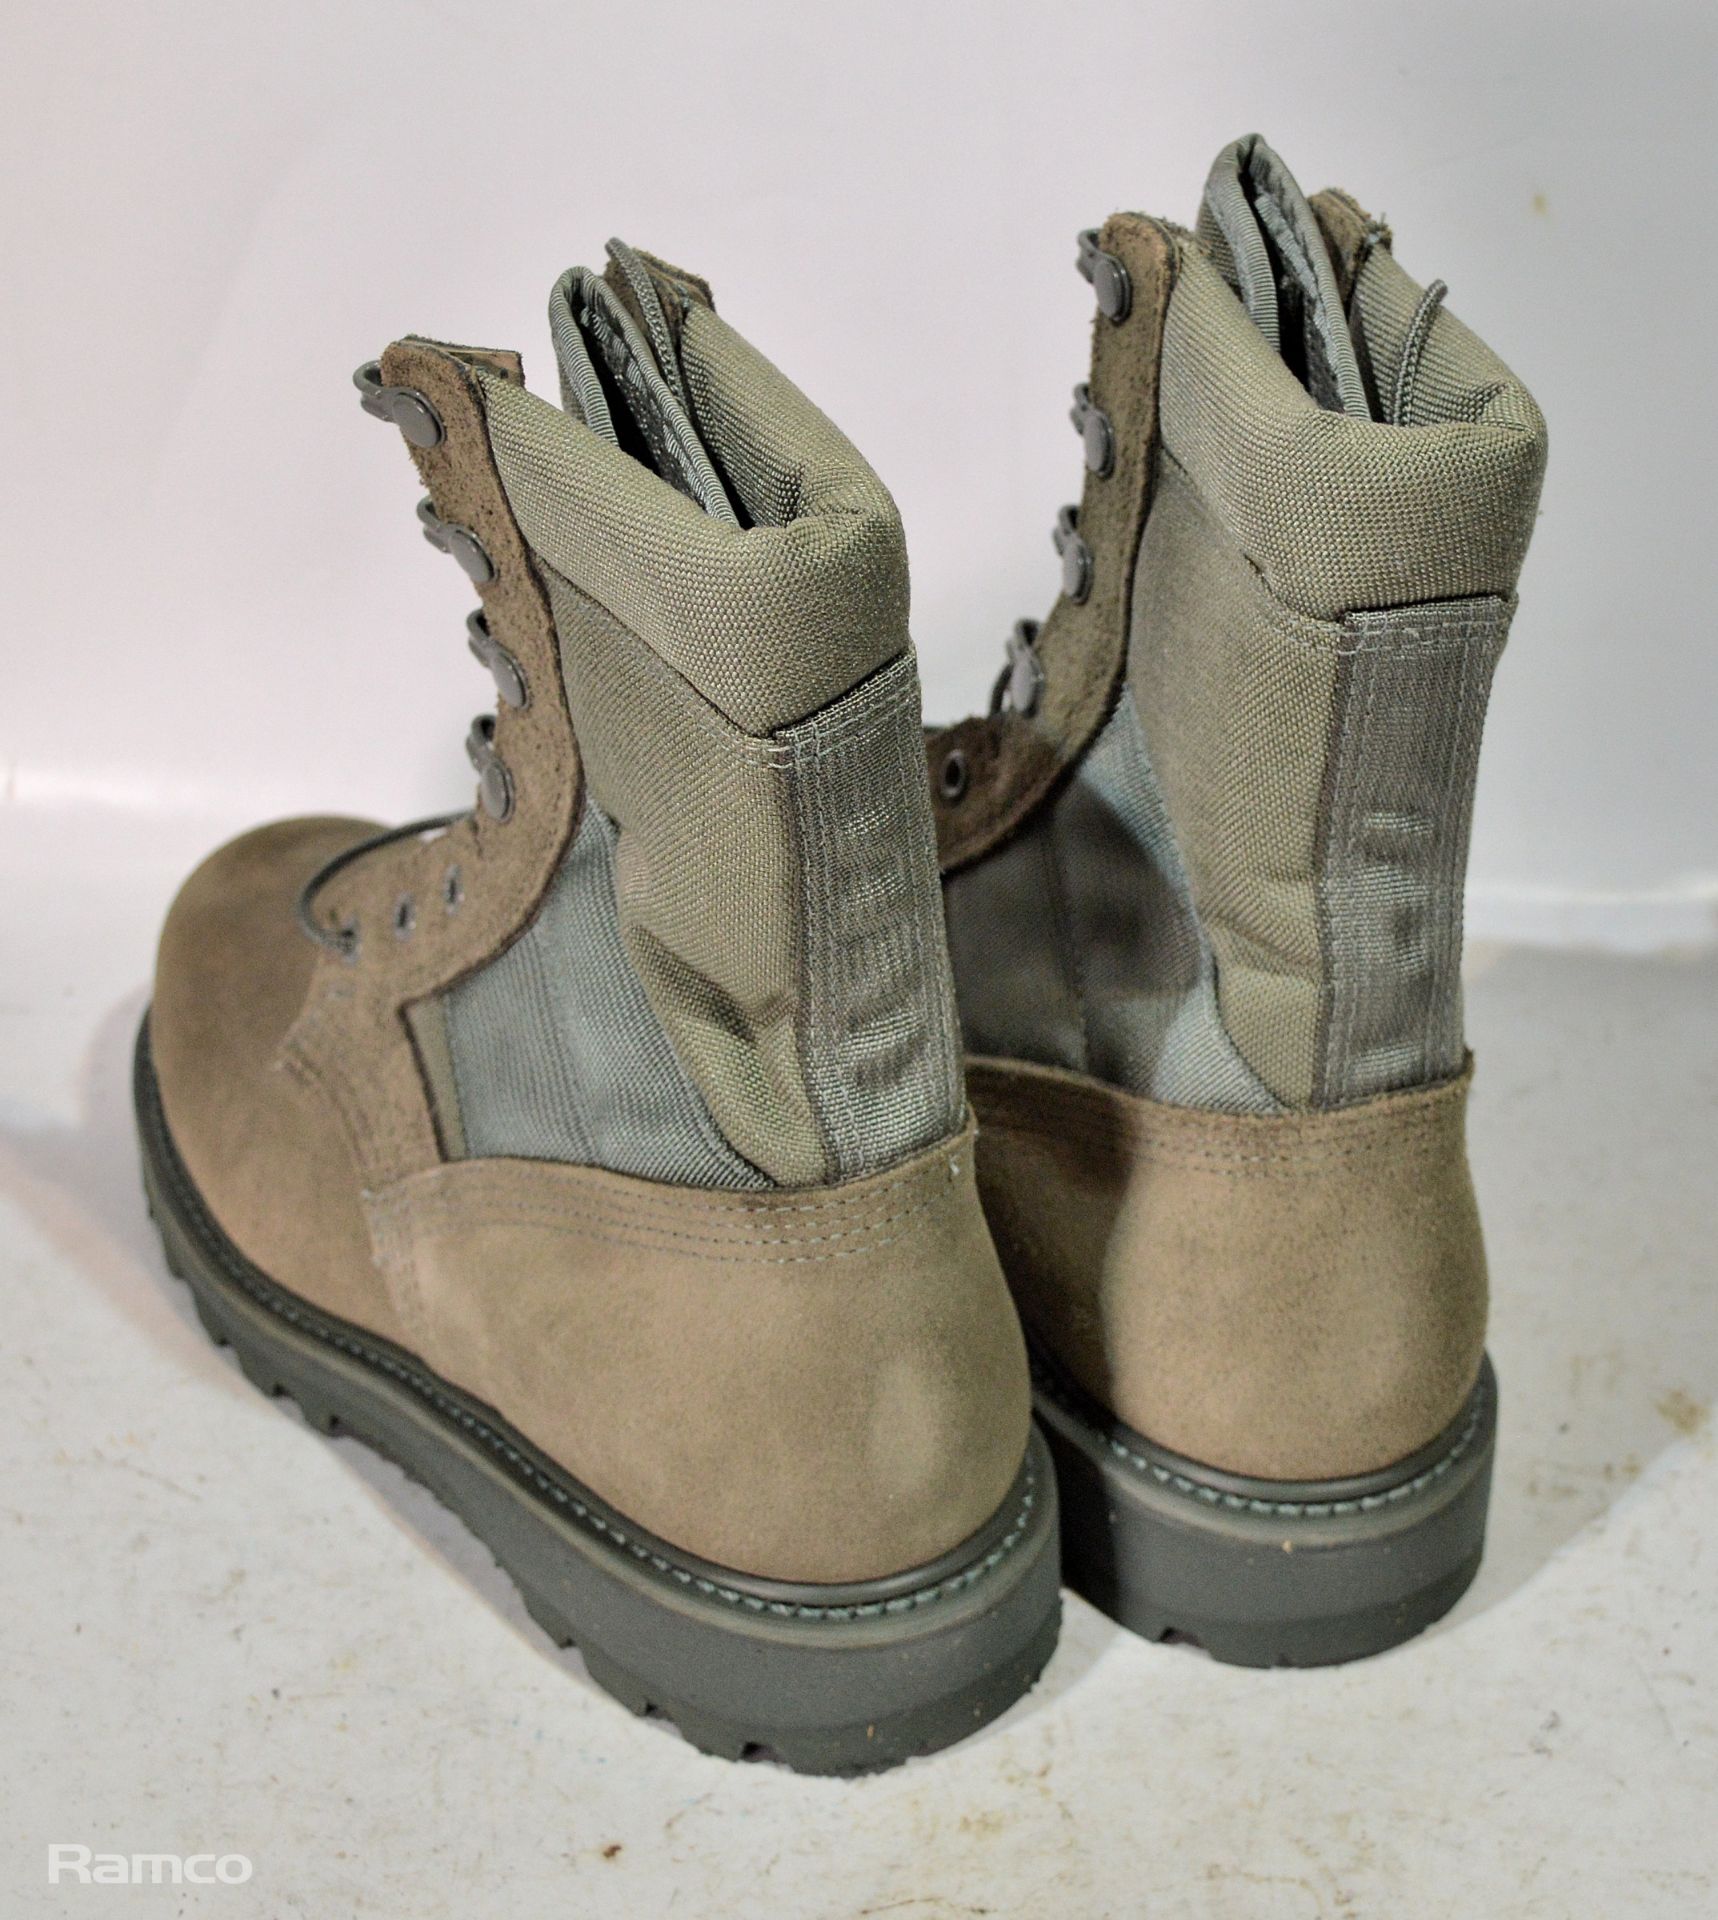 Thorogood Hot Weather Boots - 6 1/2 W - Image 4 of 4